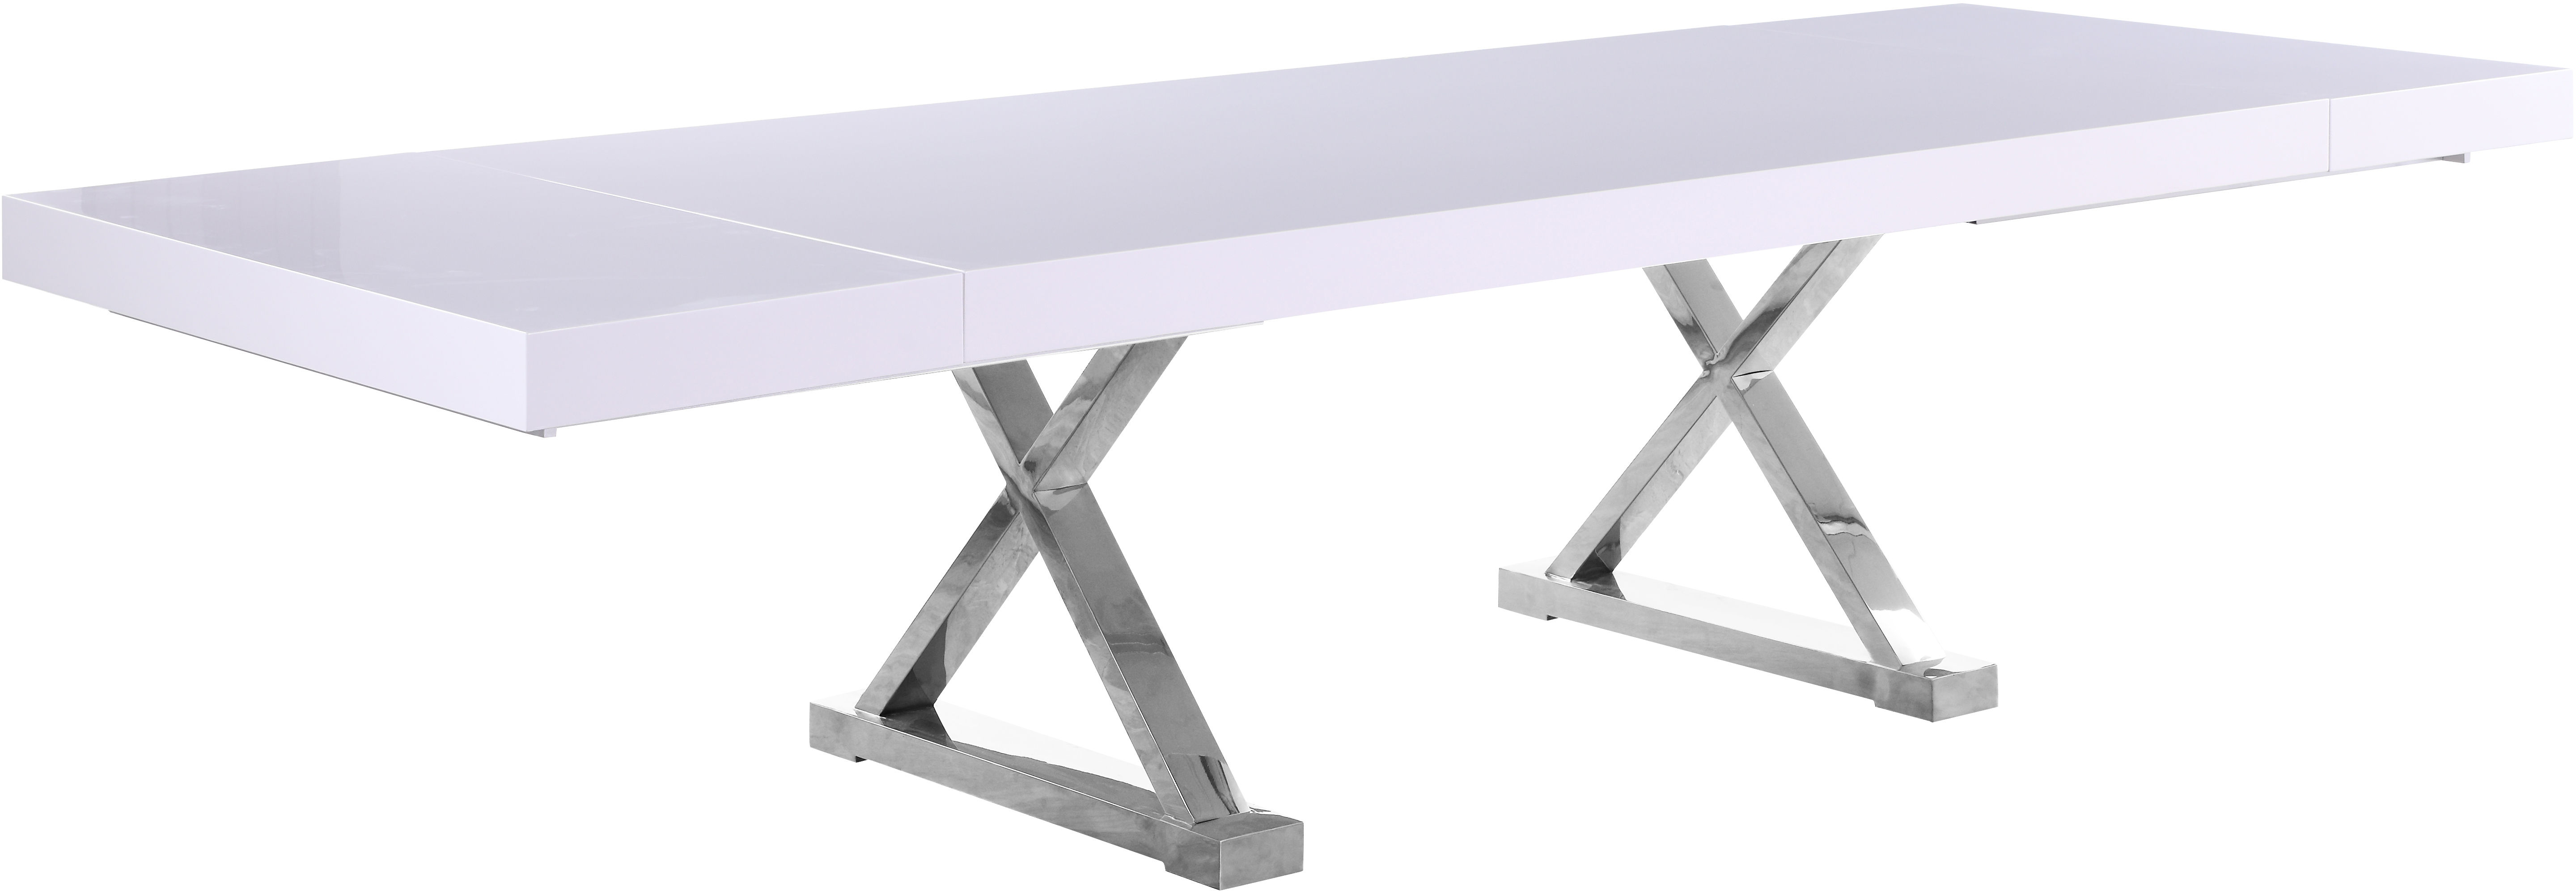 Meridian Furniture Excel White Lacquer Chrome Base Extendable Dining Table